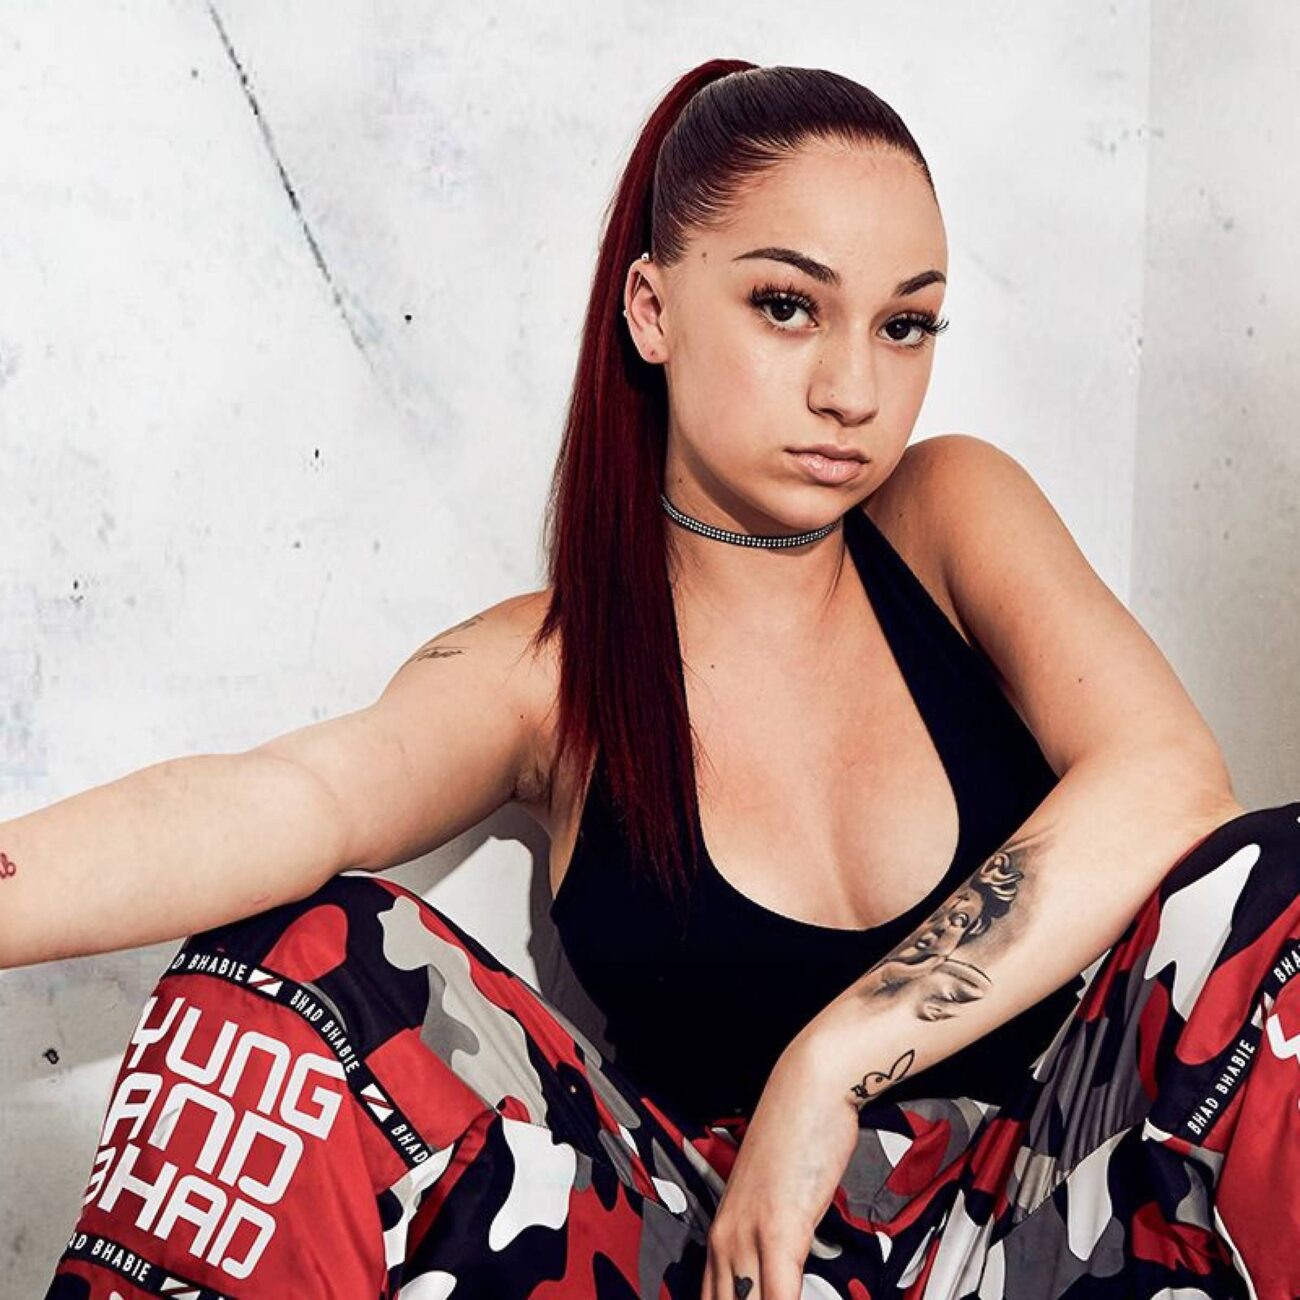 We all know the "catch me outside" girl, but do you know how Danielle Bregoli has kept her stardom? Check out her surprising net worth and OnlyFans journey.